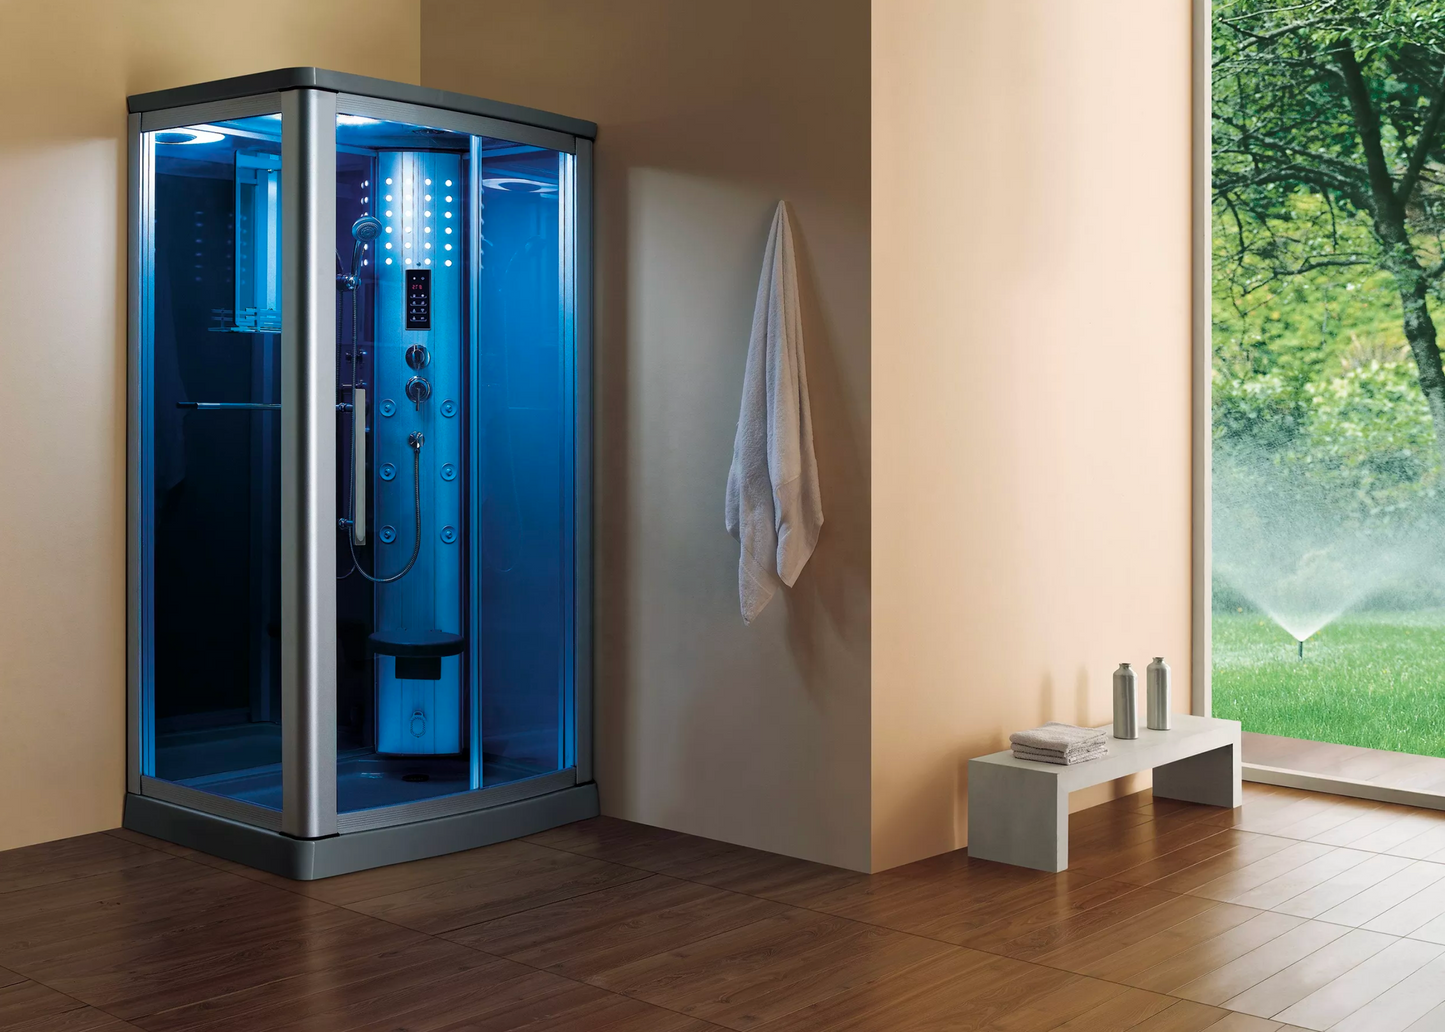 (right wall) Mesa 802L Steam Shower - Buy Online at Mesa Steam Showers